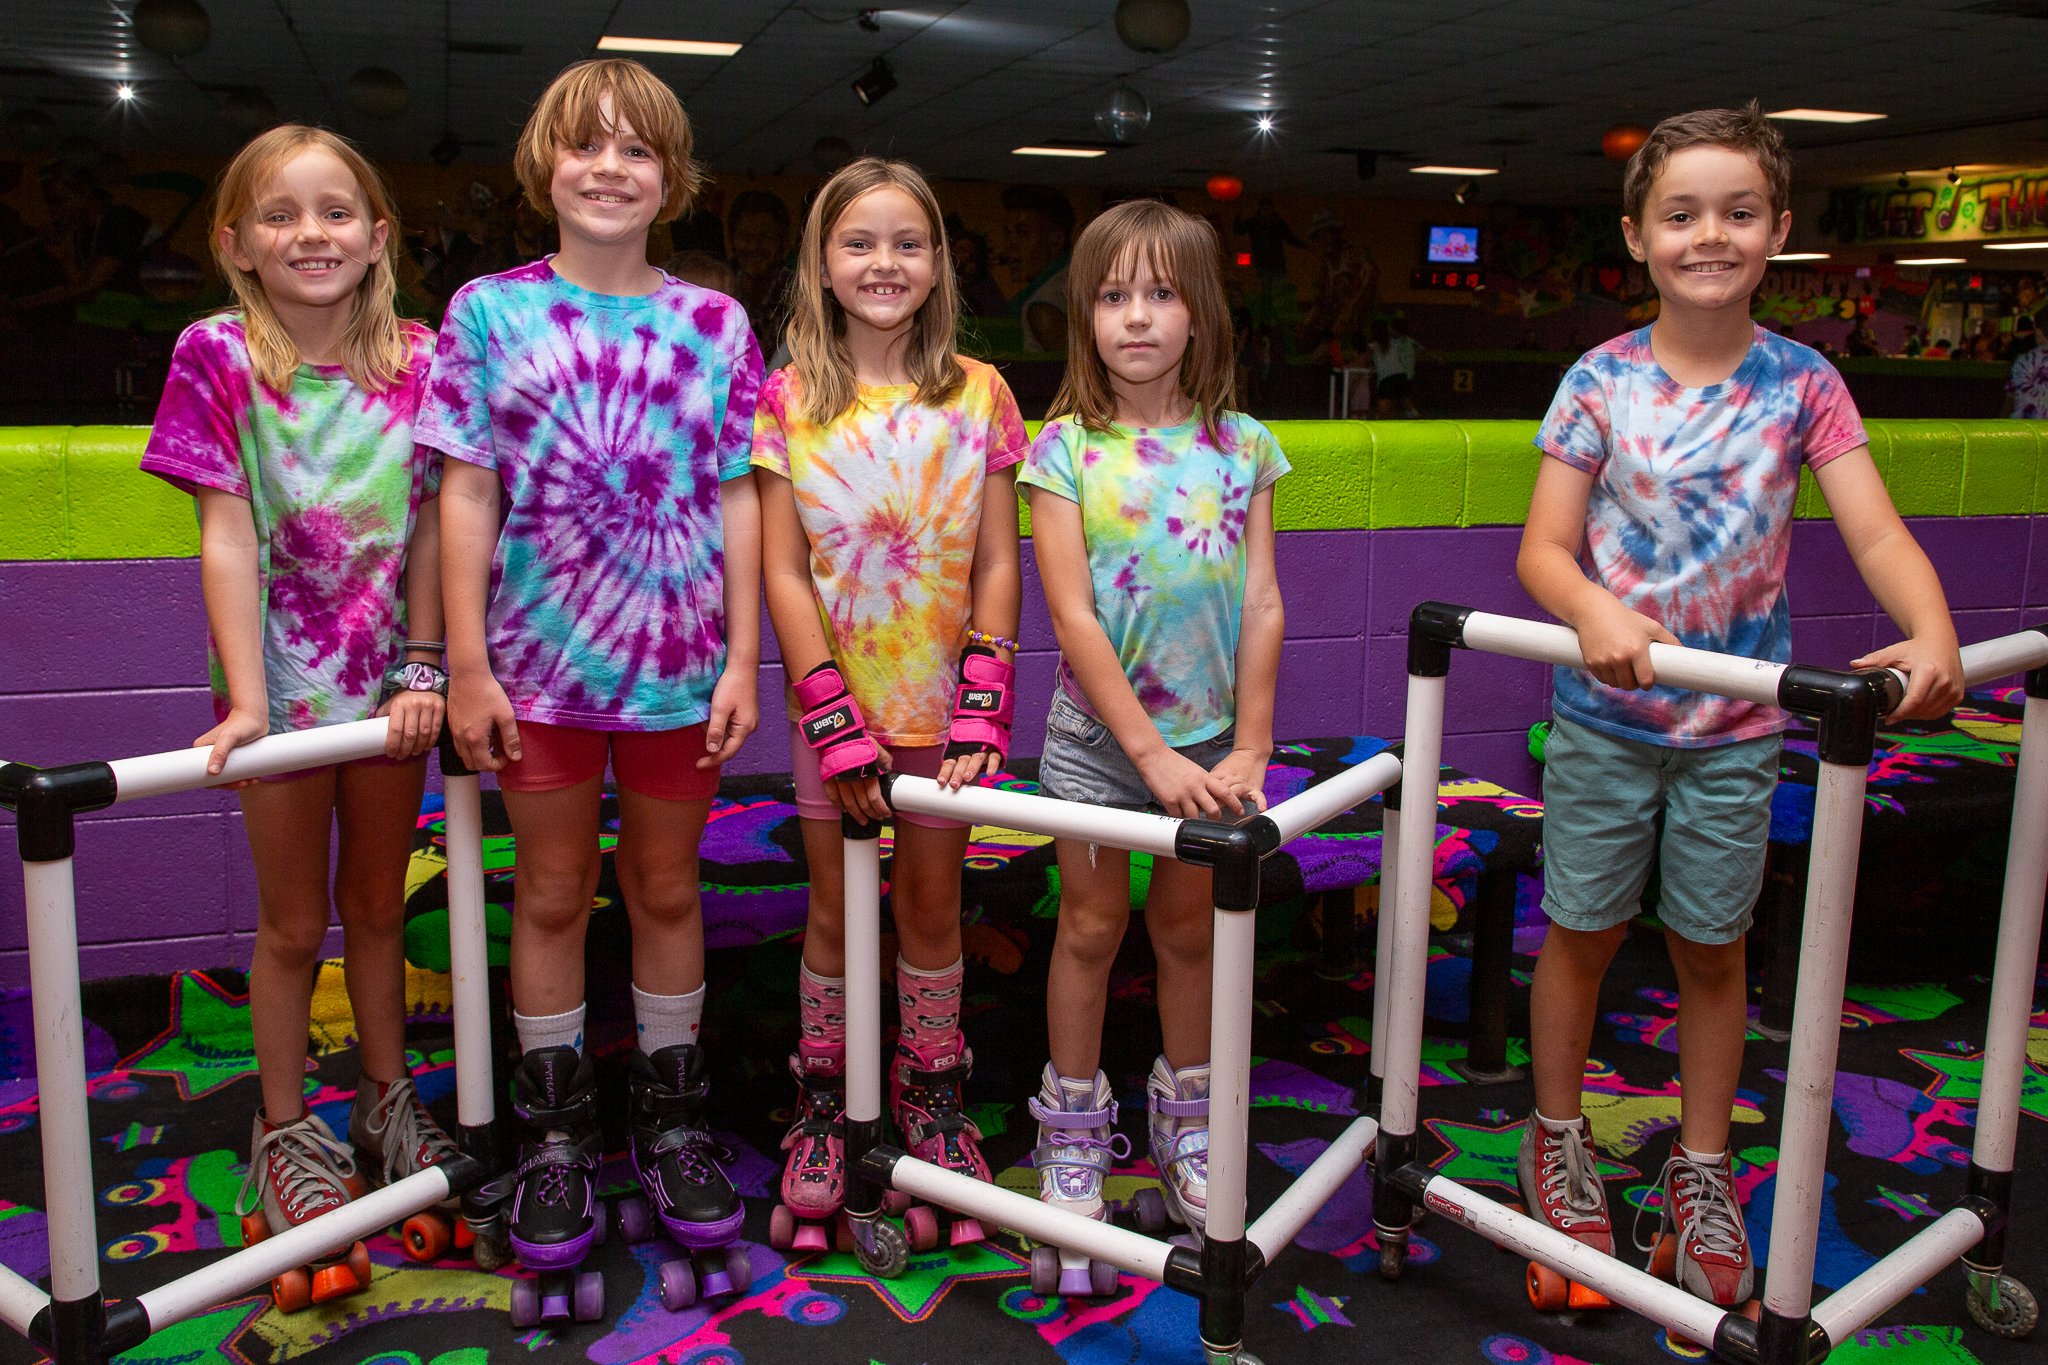 Five kids in tie-dye shirts smile for a photo after rollerskating